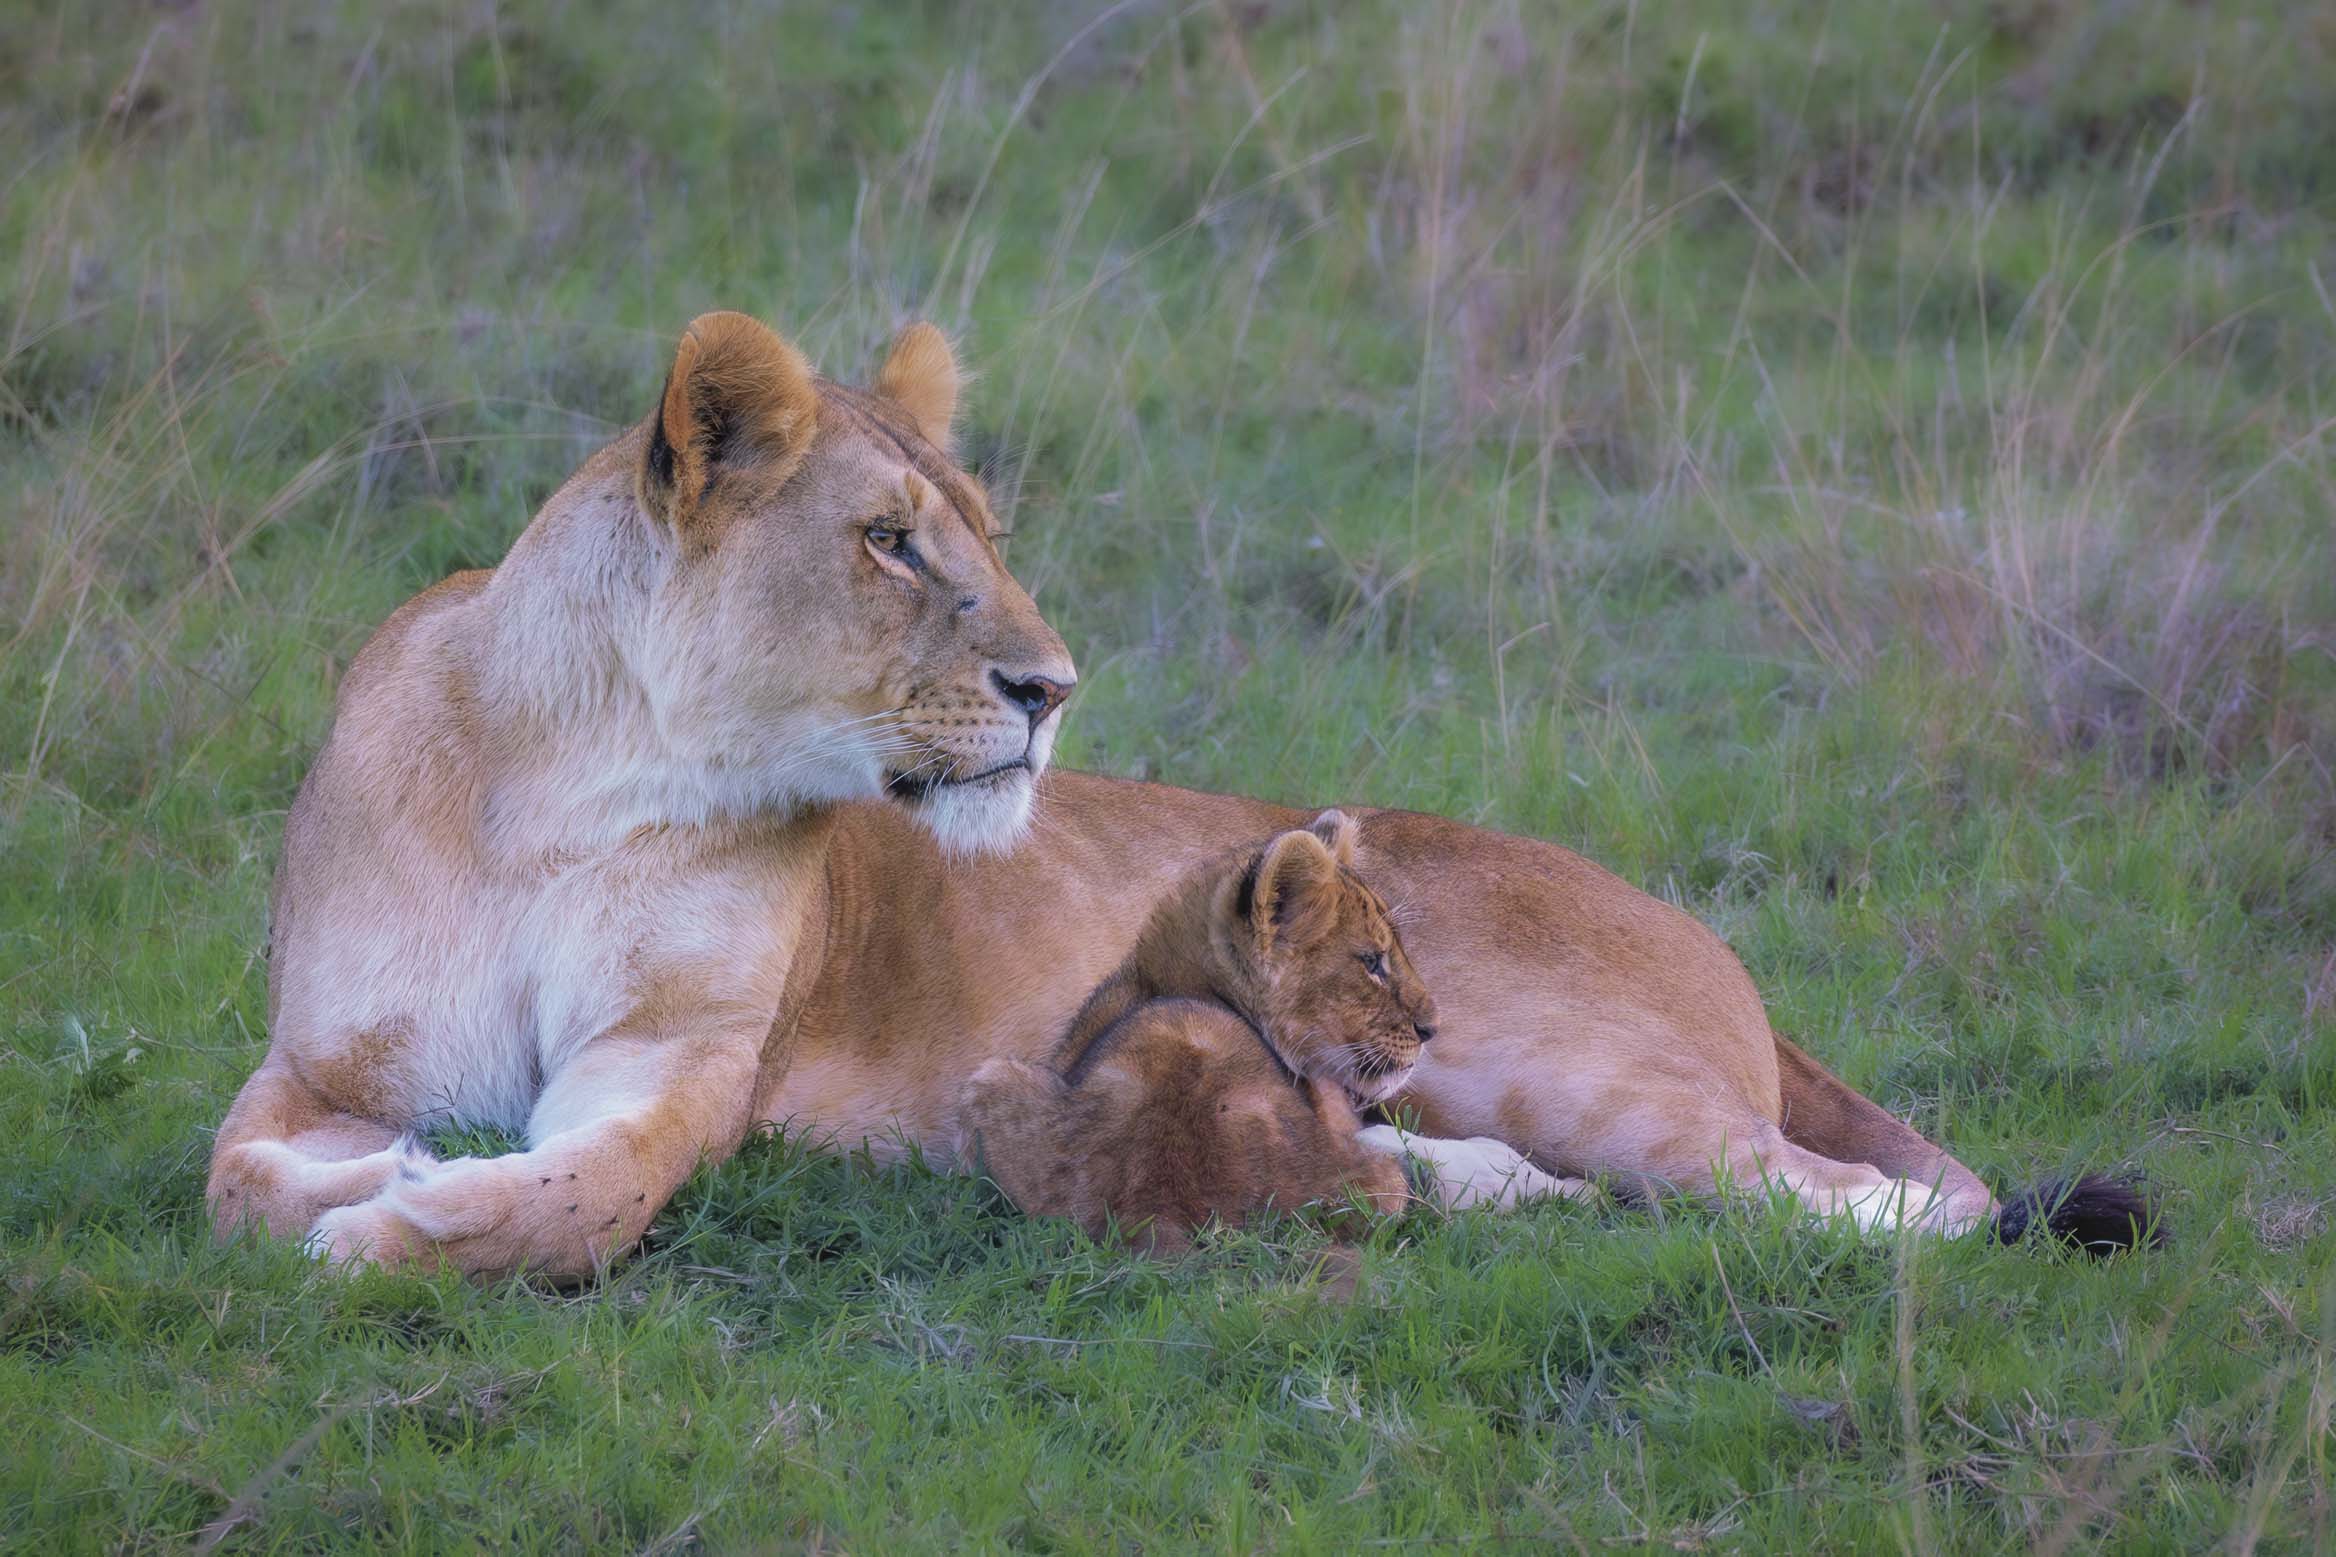 04x06_lioness-and-cub_landscape.jpg